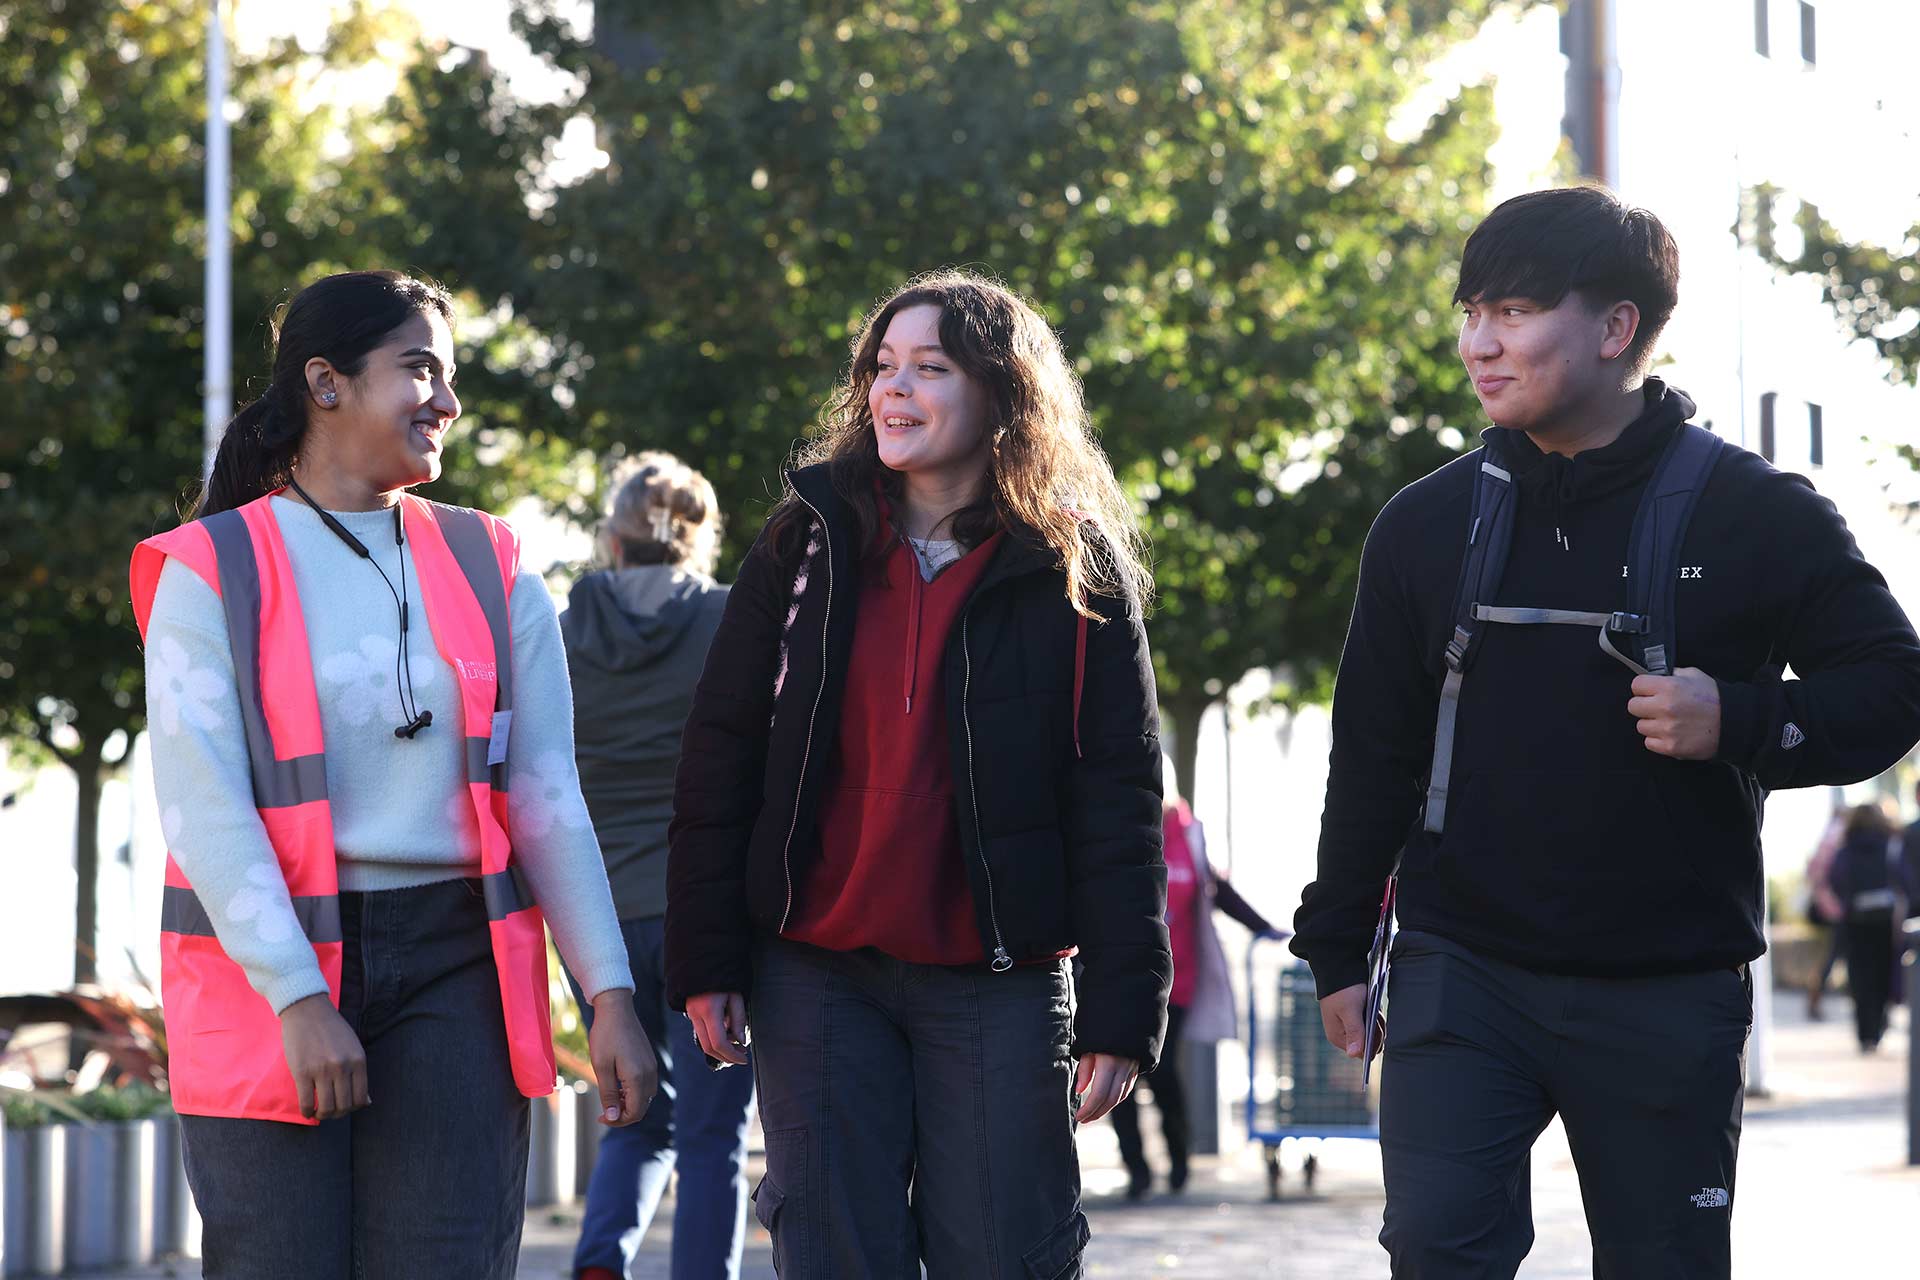 A University of Liverpool ambassador chatting with two students whilst walking through campus